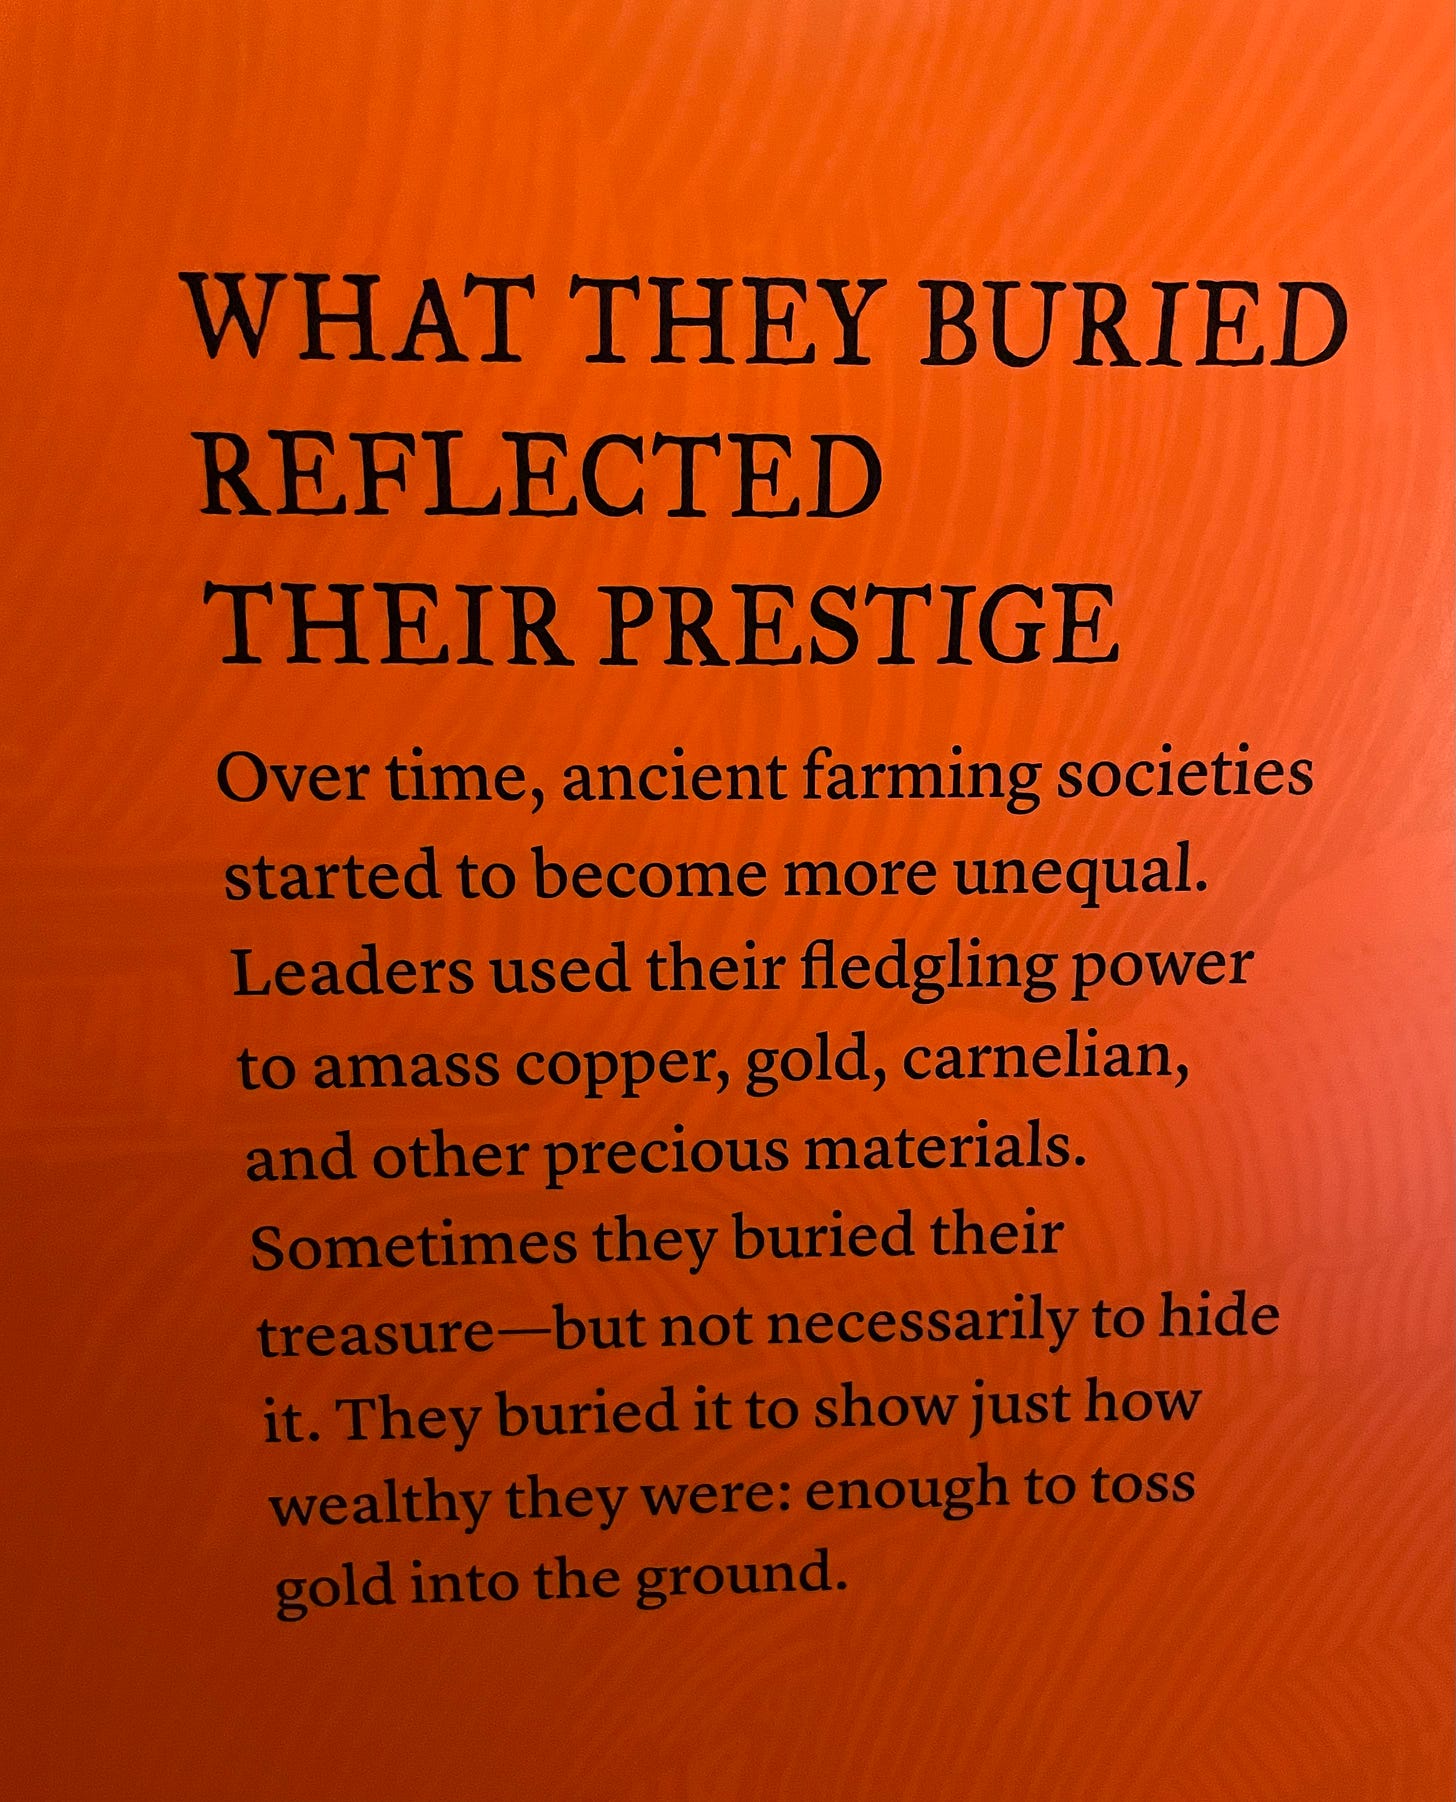 museum plaque reading 'what they buried reflected their prestige. Over time, ancient farming societies started to become more unequal. Leaders used their fledgling power to amass copper, gold, carnelian, and other precious materials. Sometimes they buried their treasure—but not necessarily to hide it. They buried it to show just how wealthy they were: enough to toss gold into the ground'